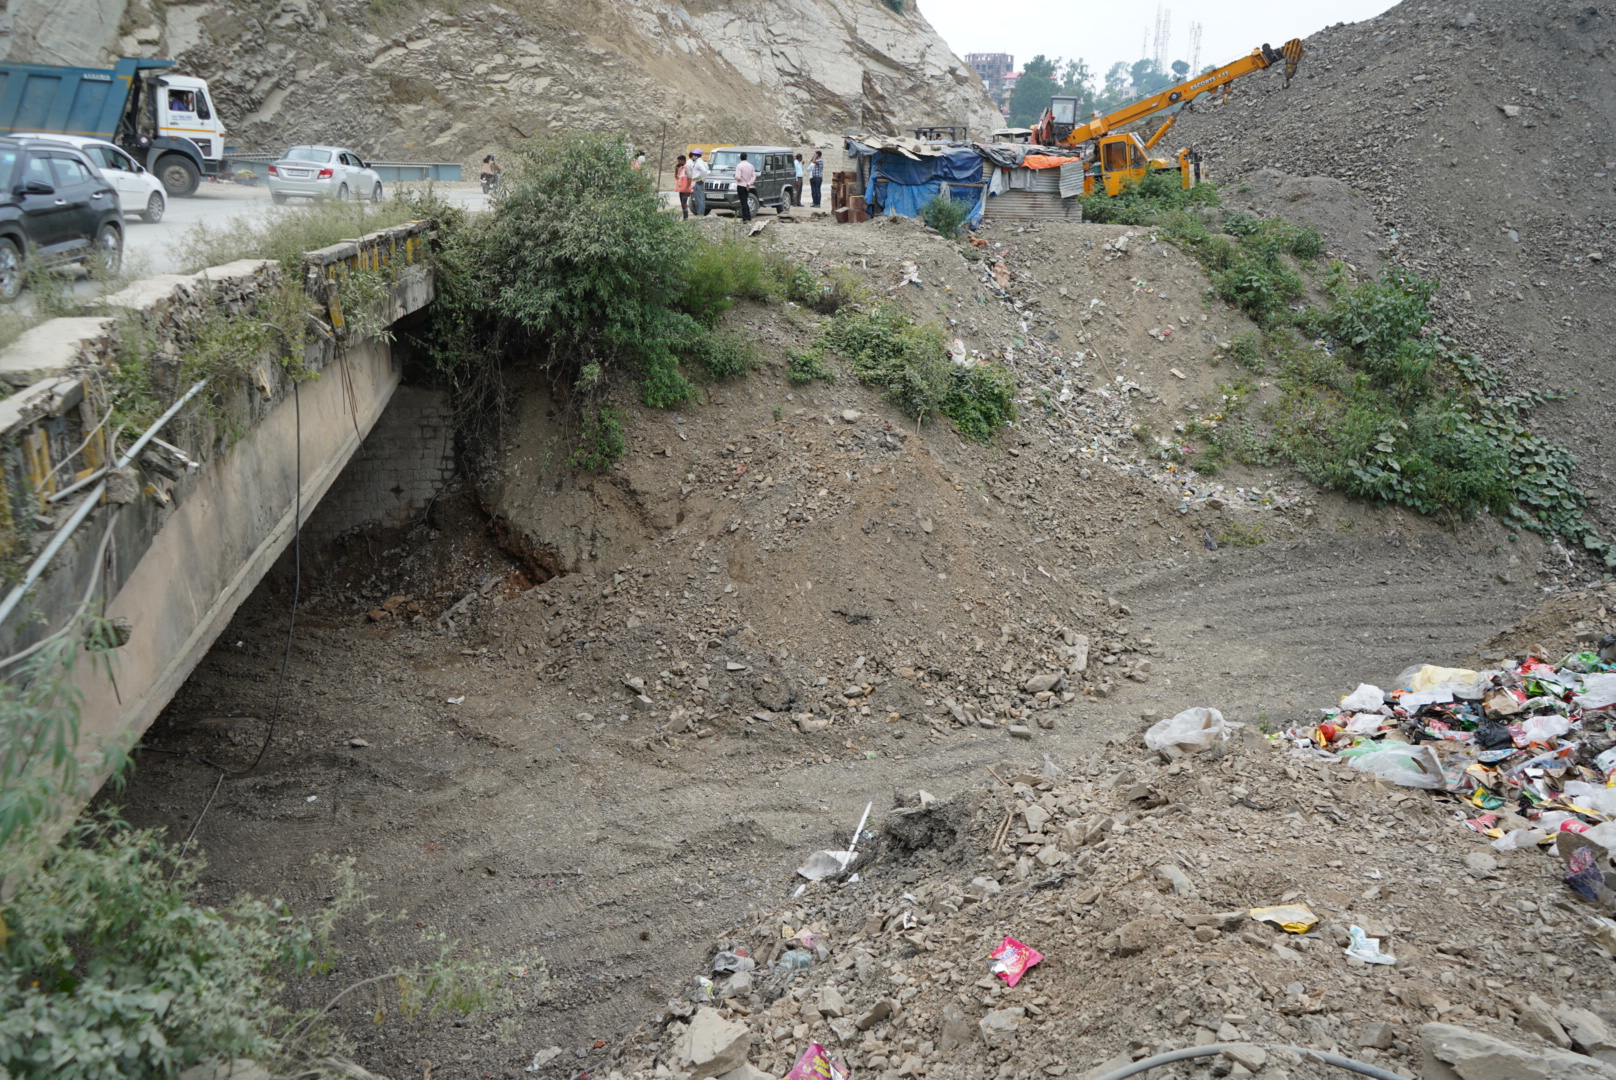 A spring that has been blocked to widen the Chandigarh-Shimla highway, a common sight across Himachal Pradesh (Image: Kapil Kajal)